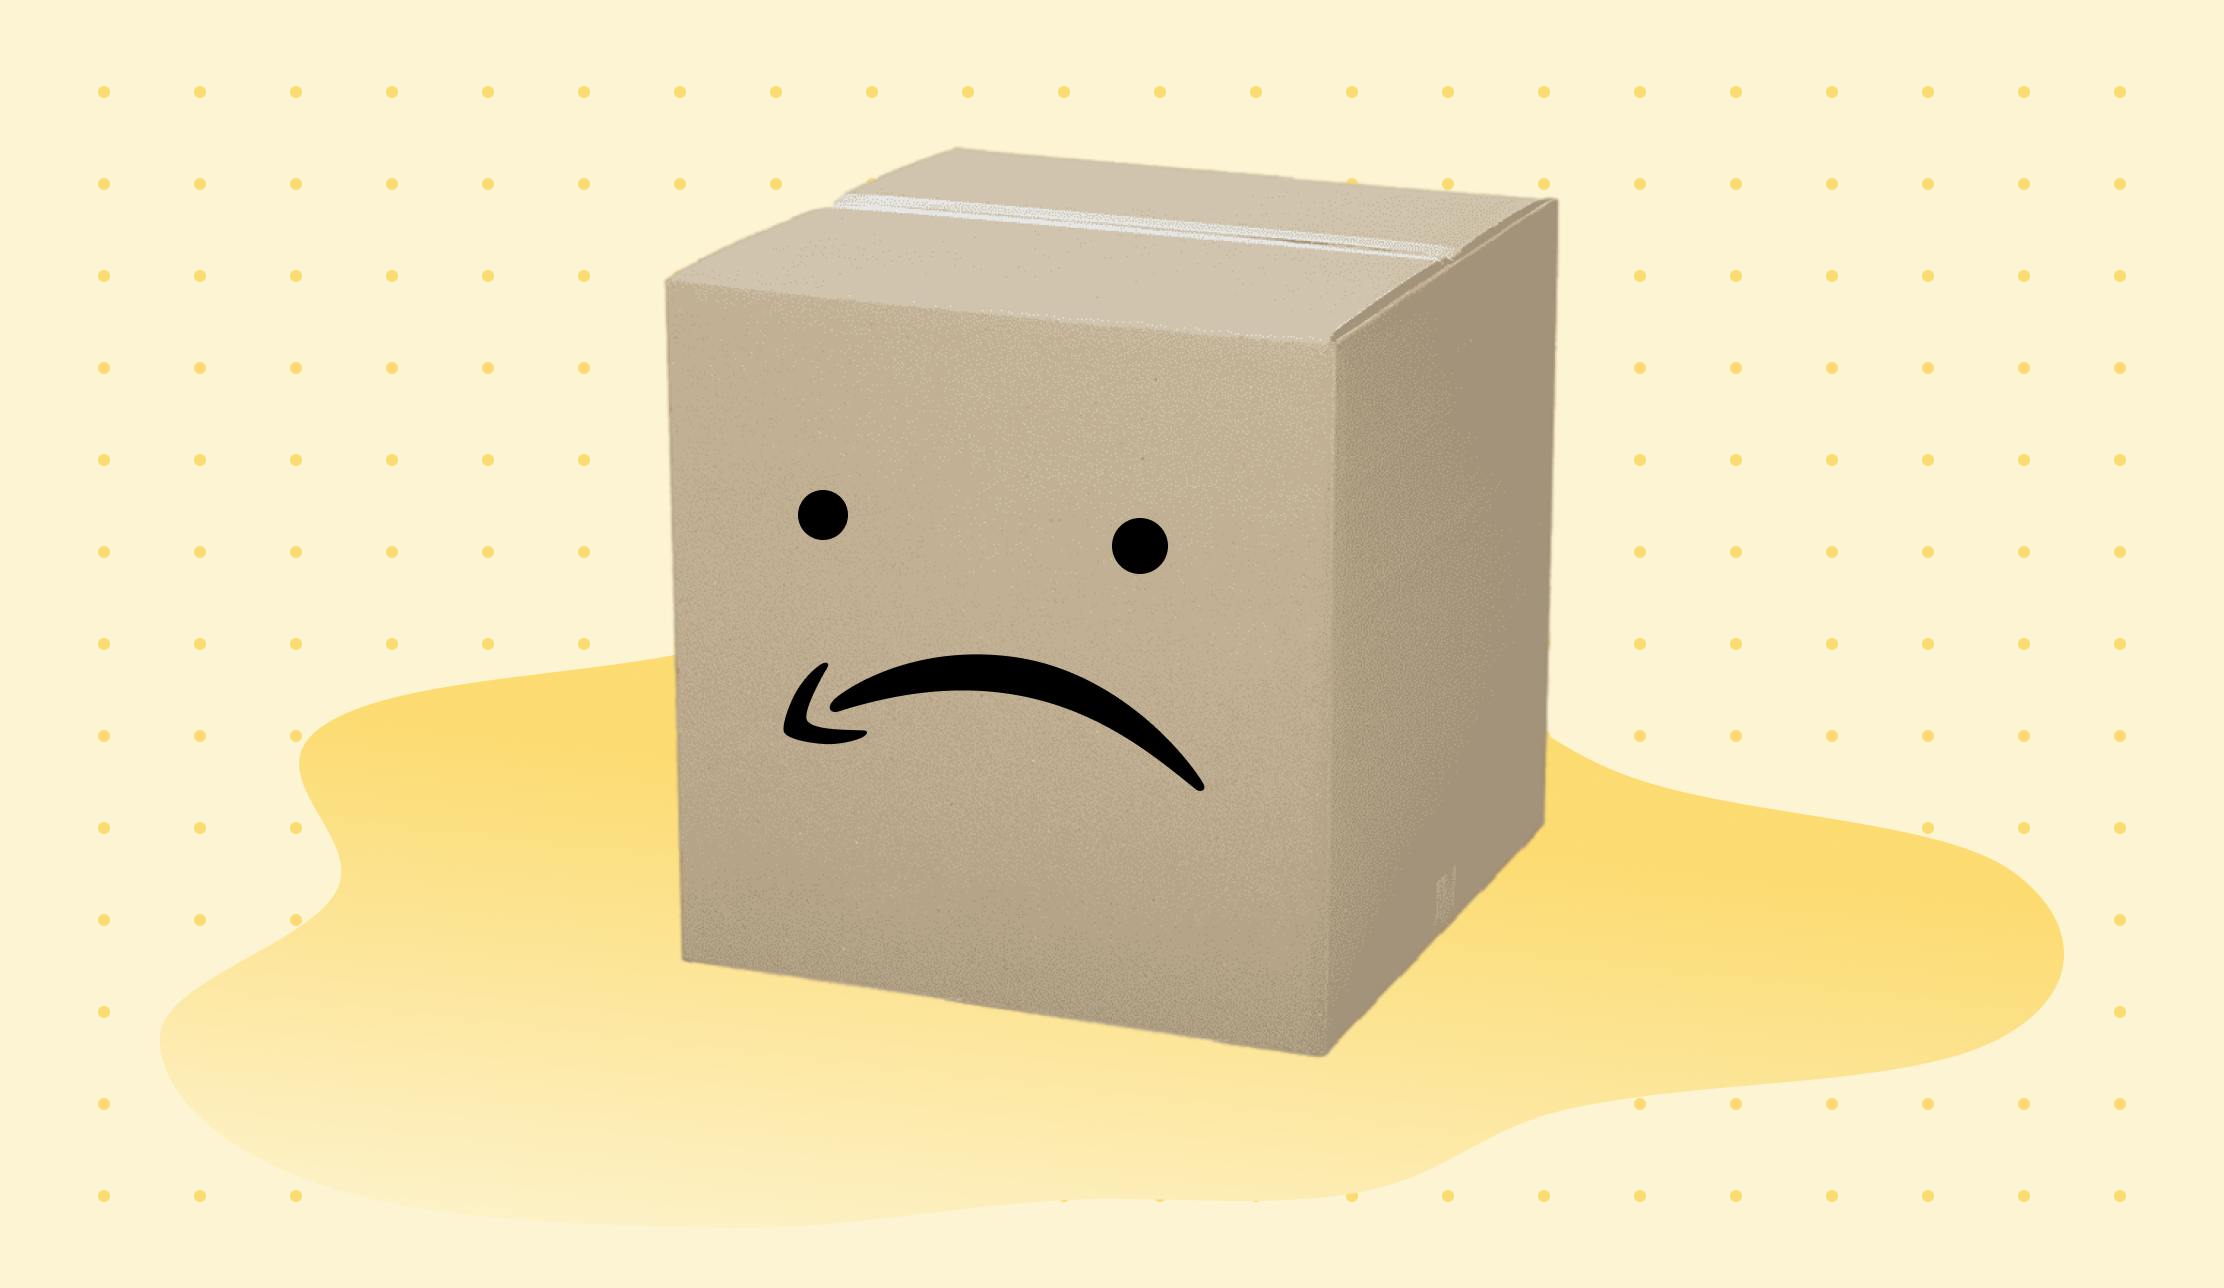 Avoid Amazon ethics: Delivery package box with a sad face using the Amazon smile logo